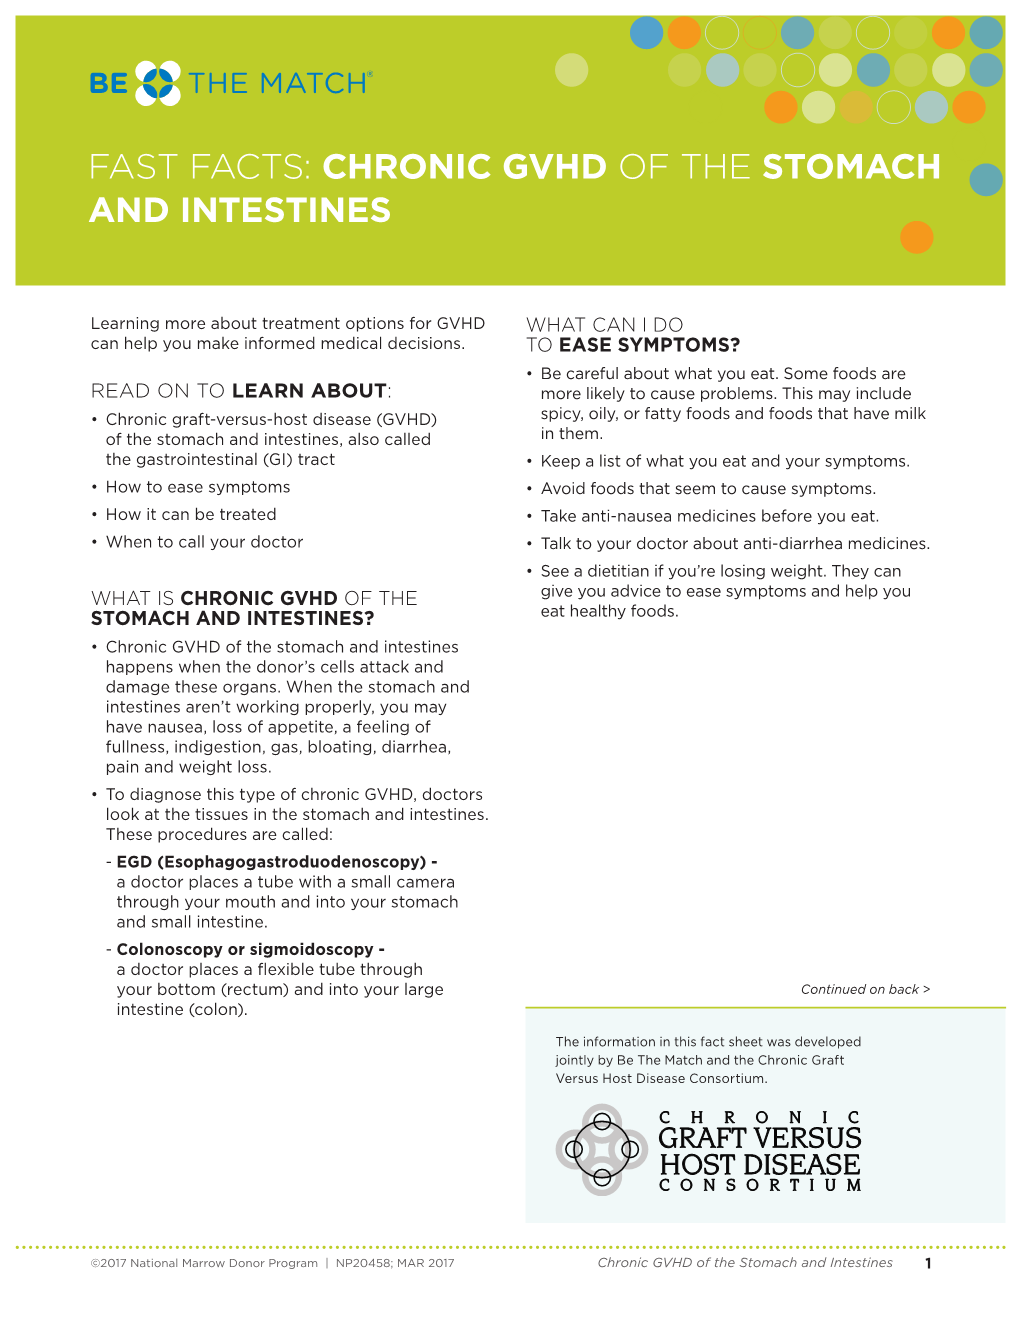 Fast Facts: Chronic Gvhd of the Stomach and Intestines